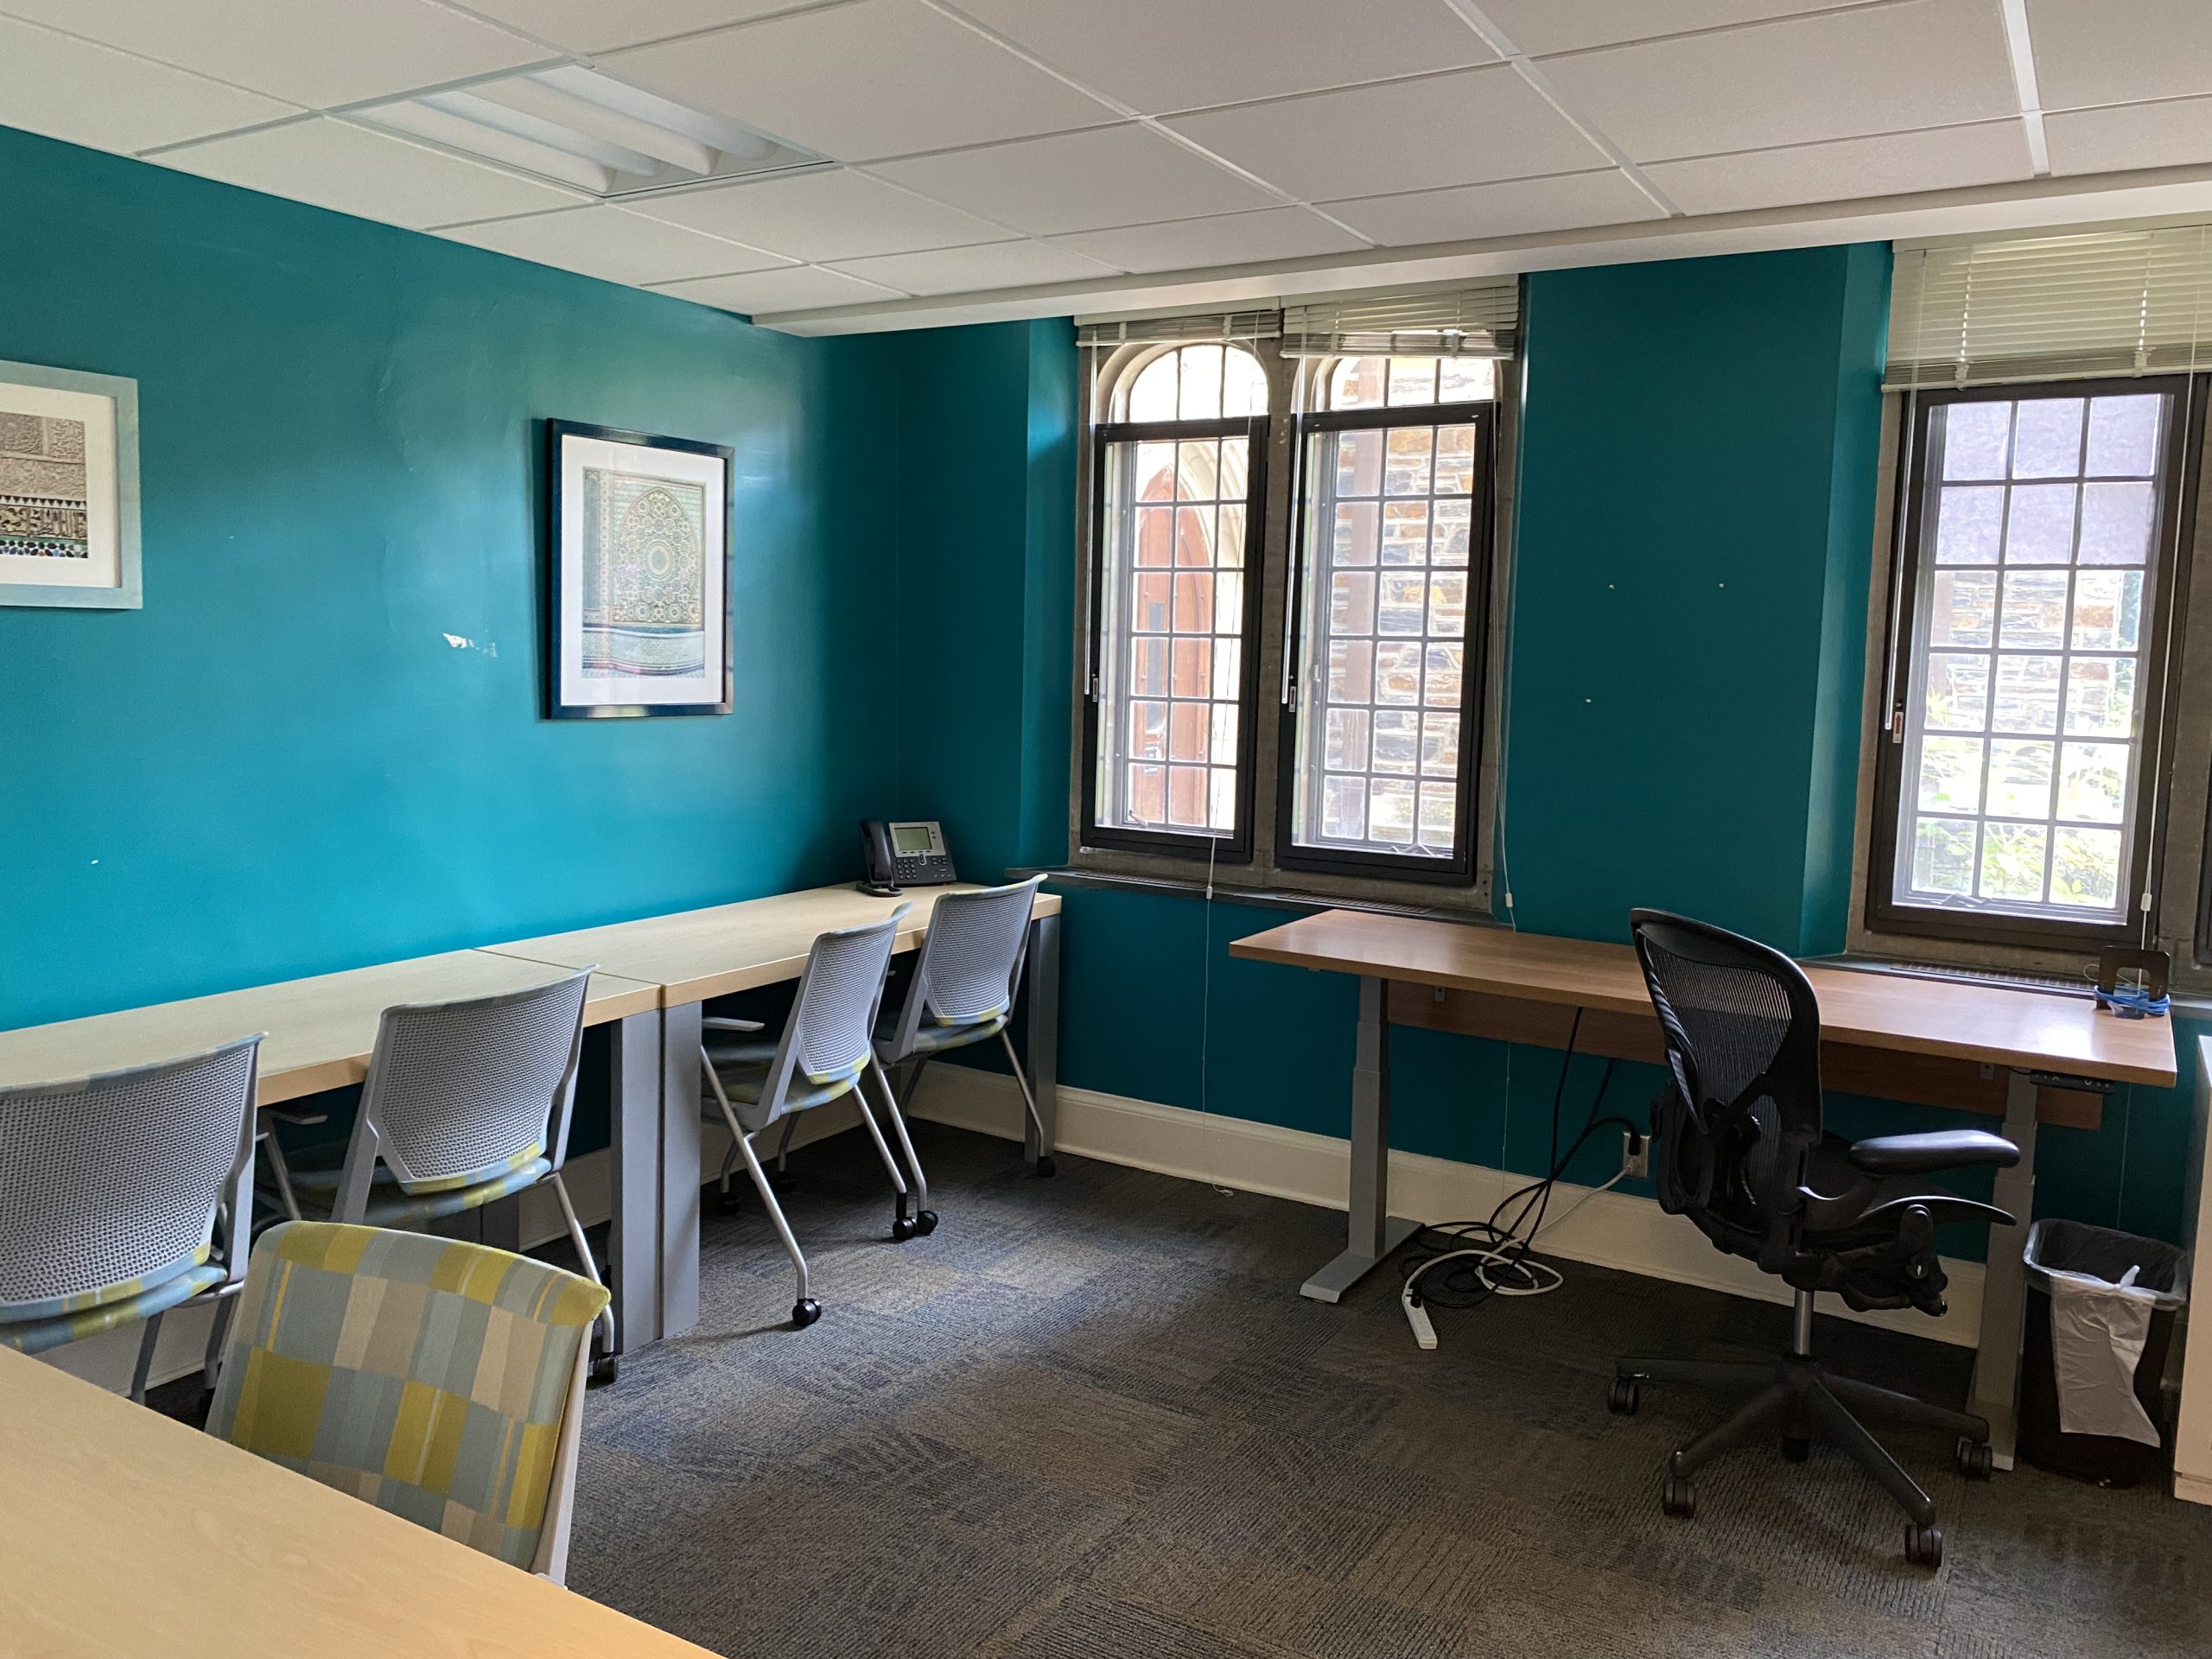 Study room in the Center for Muslim Life